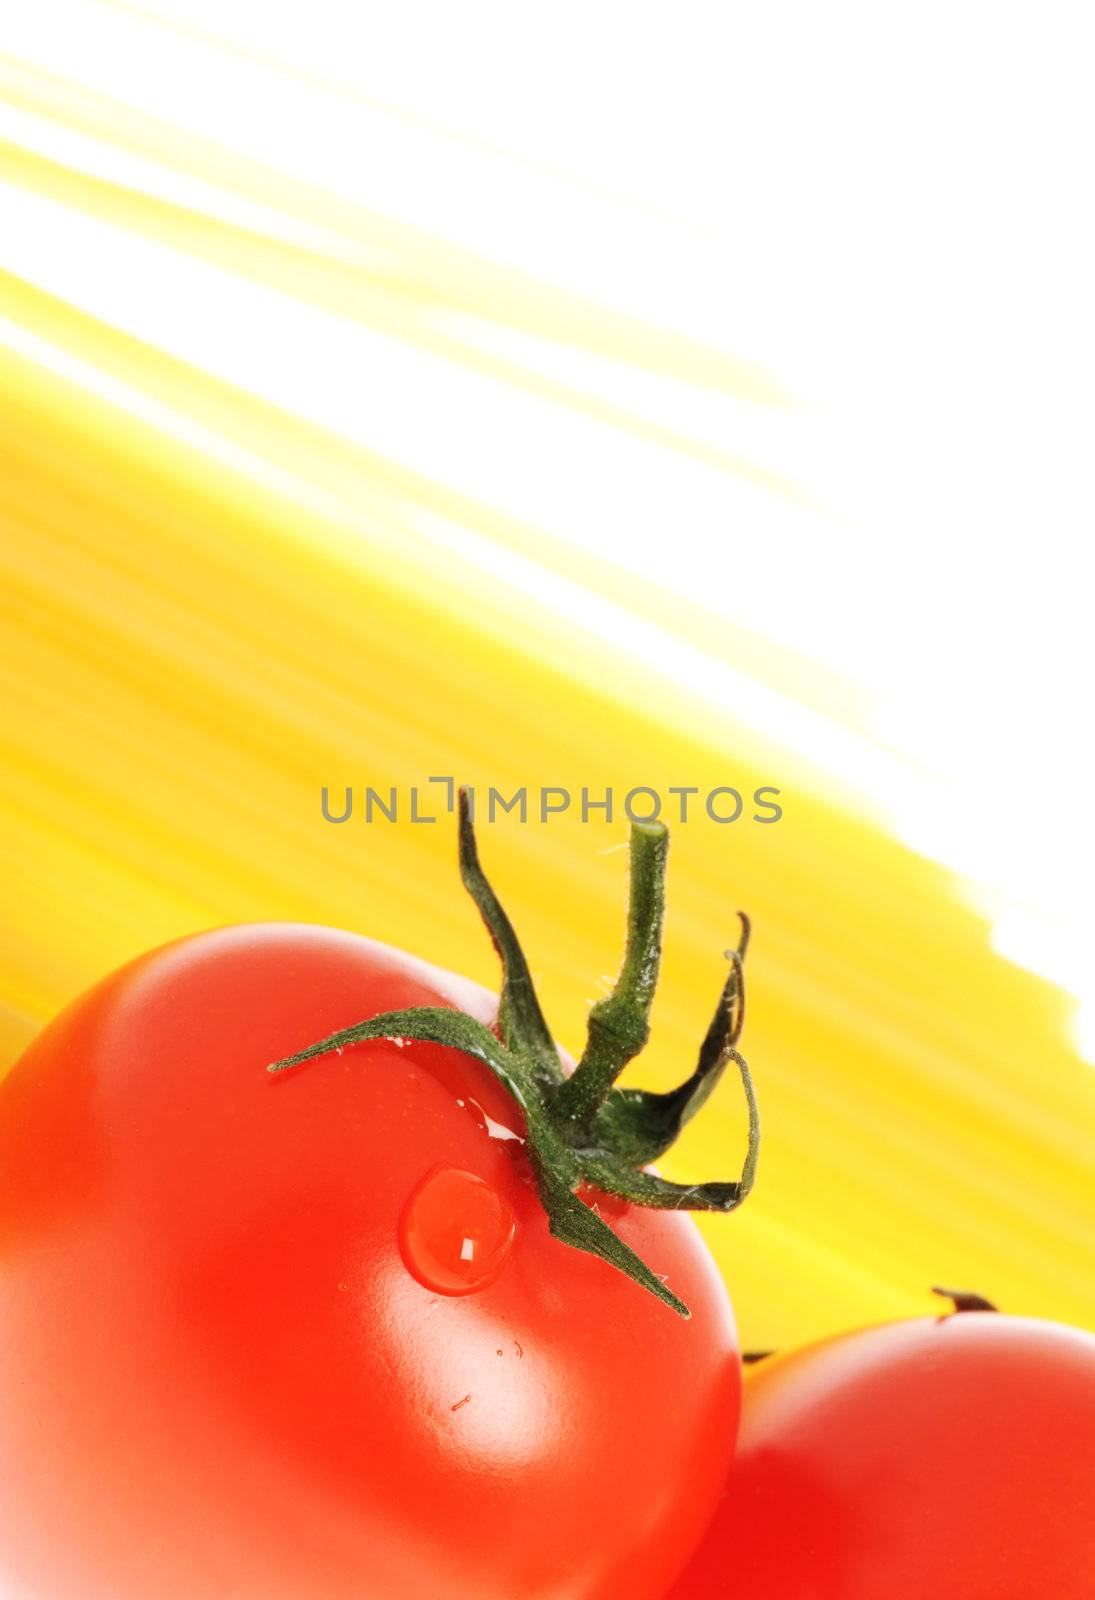 Tomato with drops by stokkete